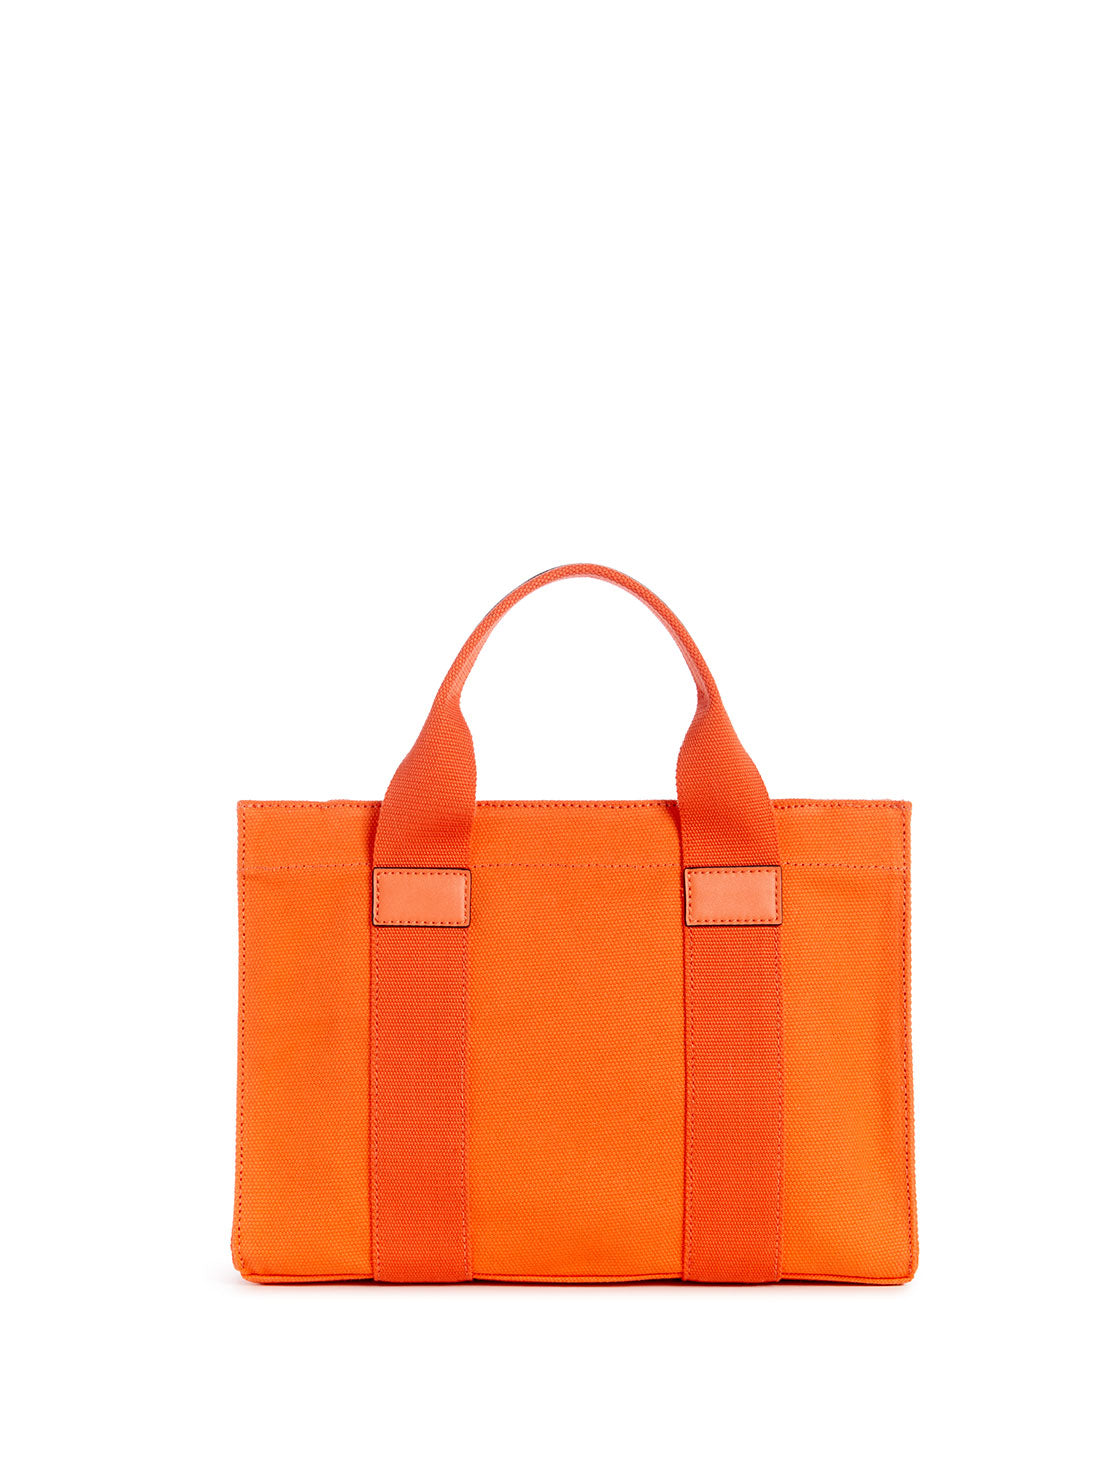 GUESS Orange Canvas Small Tote Bag back view